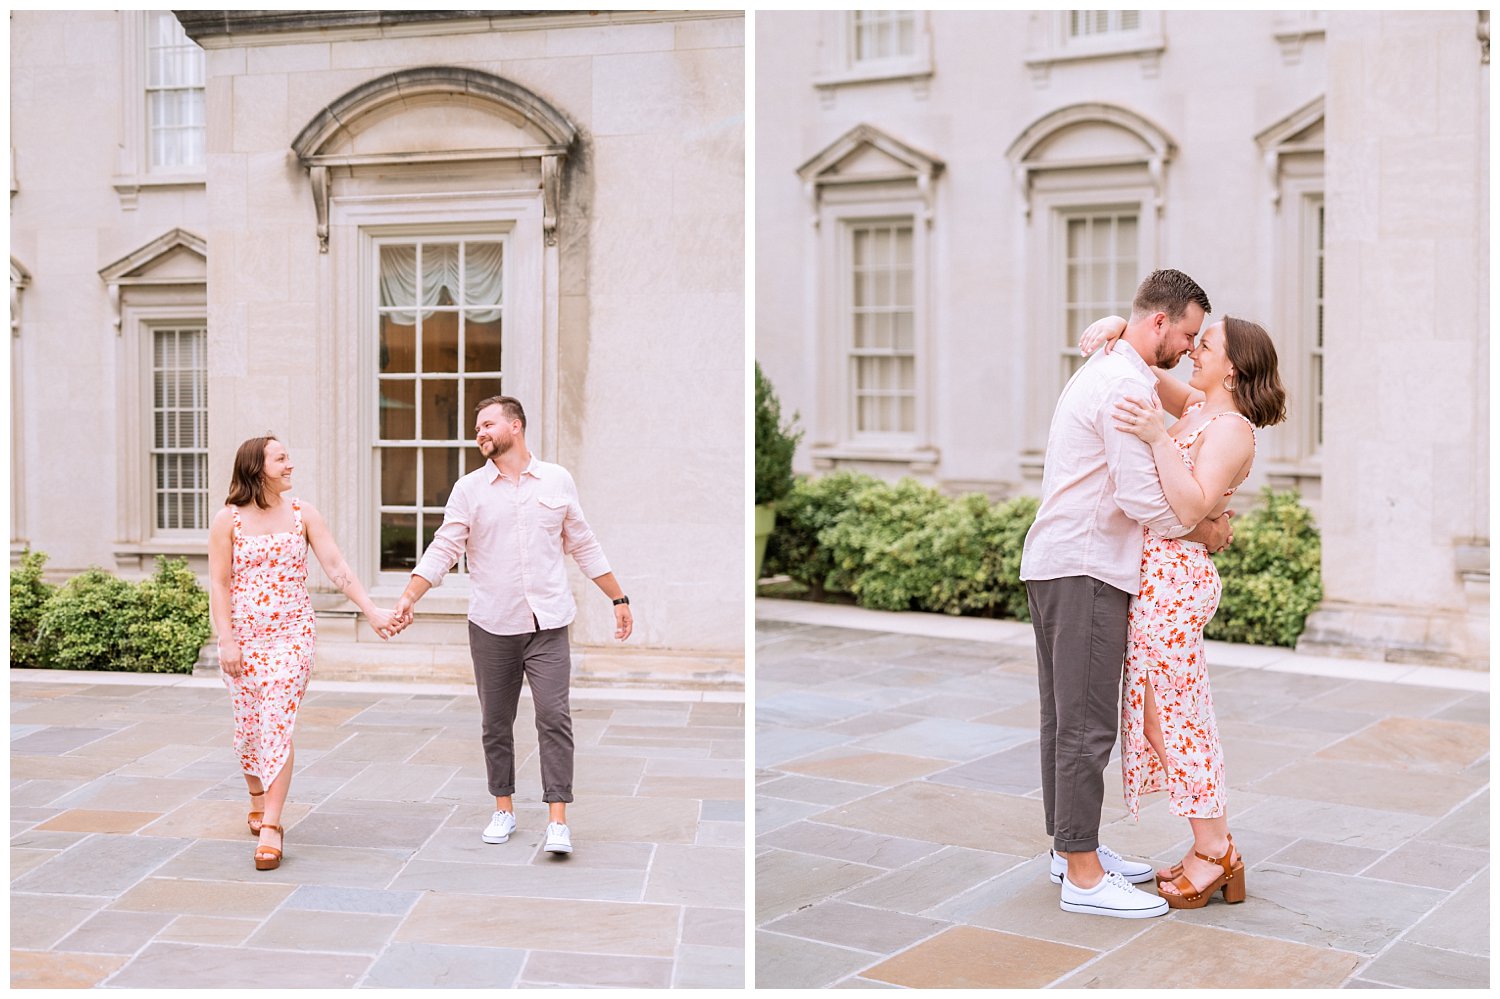 Spring engagement portraits at VMFA & Libby Hill in Richmond, Virginia. Photographed by Virginia wedding photographer Heather Dodge